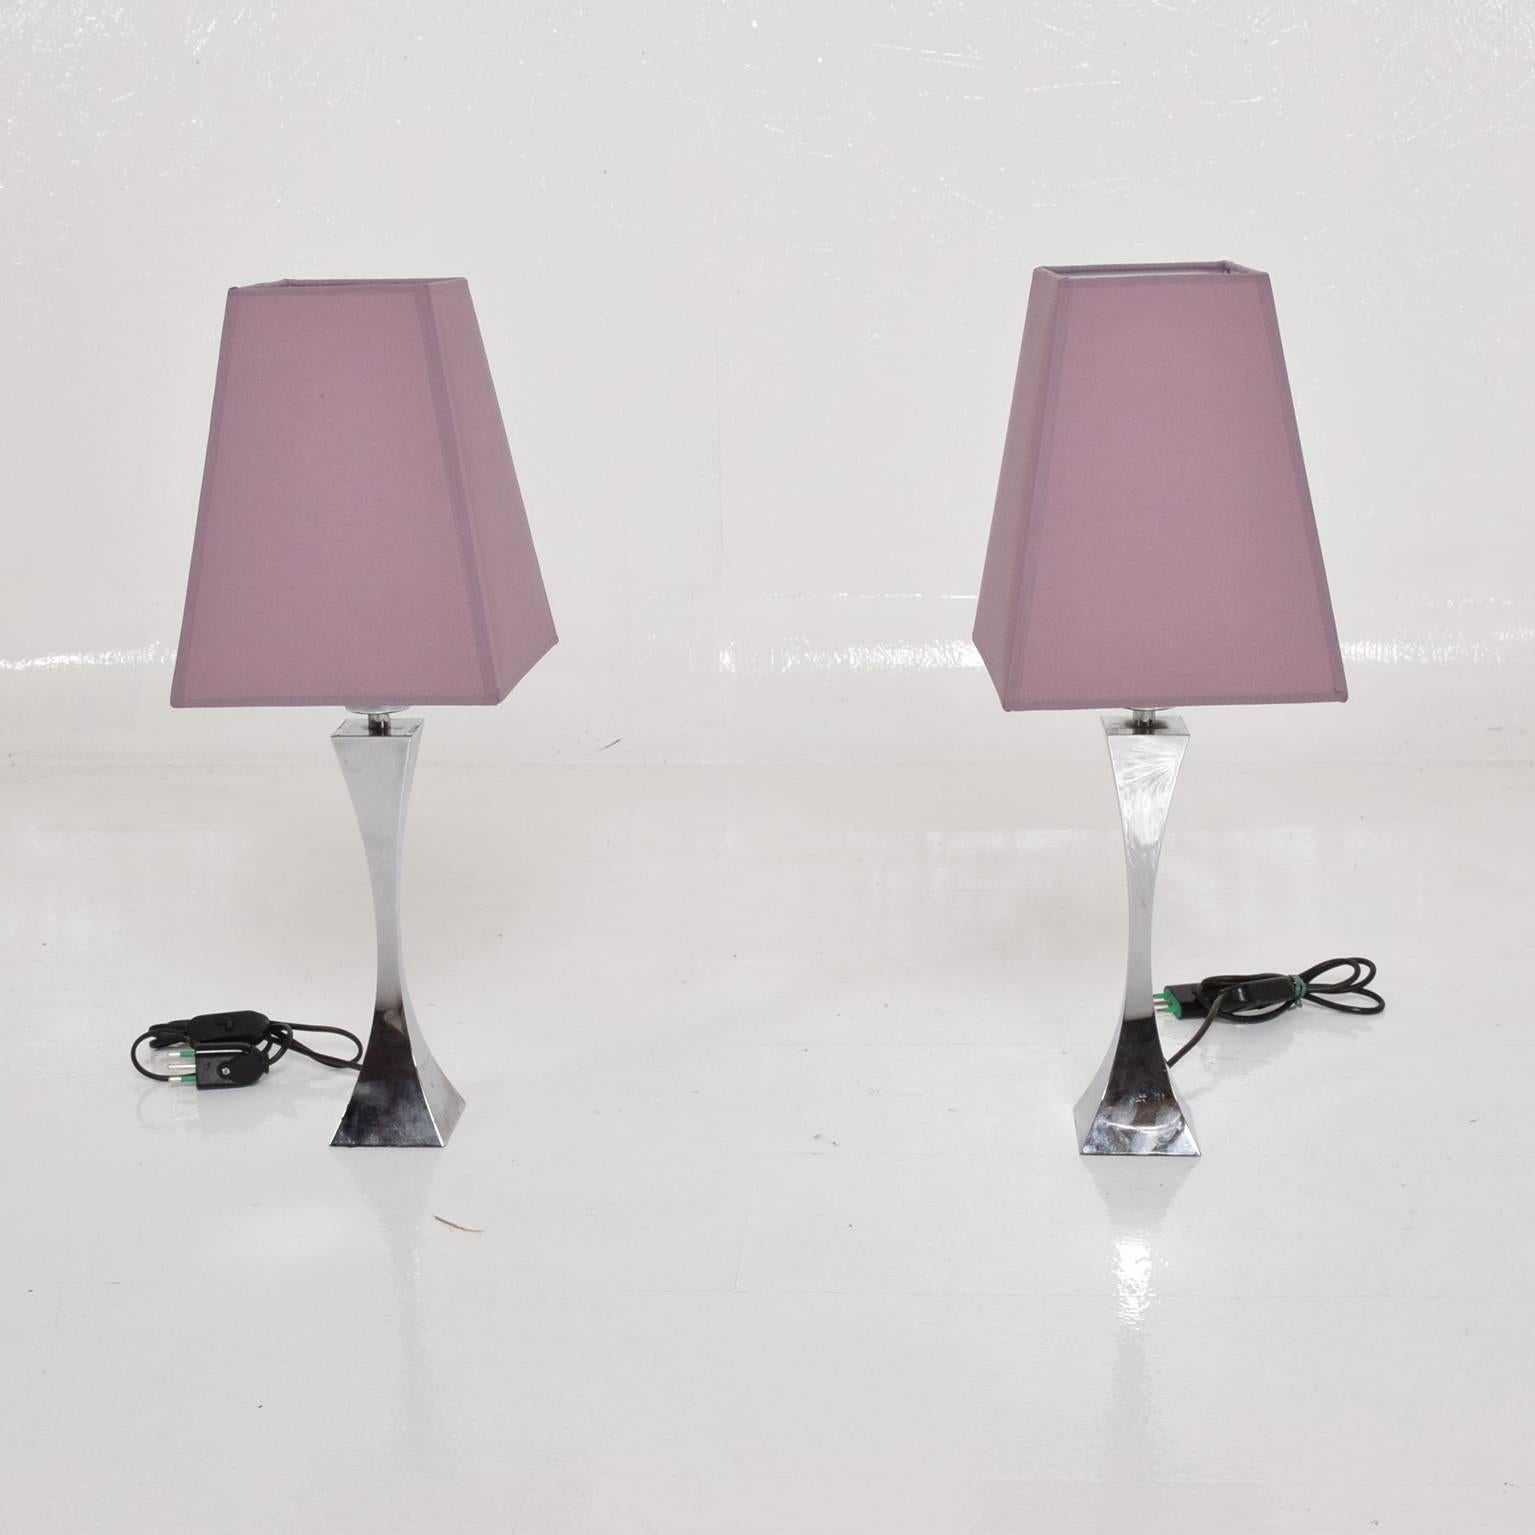 For your consideration a pair of Italian table lamps in chrome plated steel. 
Made in Italy, circa 1960s by Tonello & Montagna. 
Original shades.
Dimensions: 14" H x 3" x 3" , 22" H with shade. 
Shade 10" H x 7 3/4 x